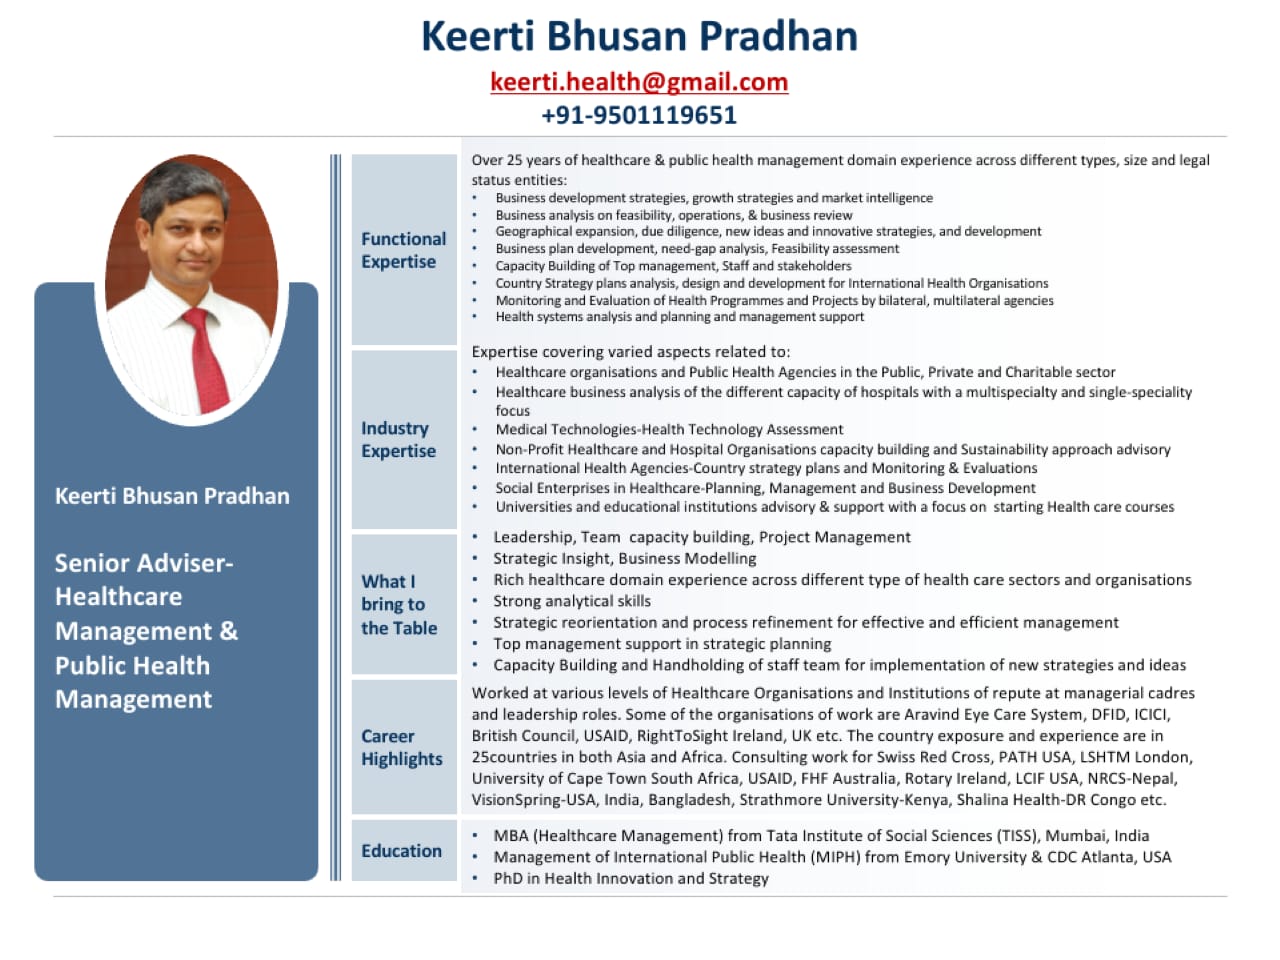 Keerti Bhusan Pradhan

keerti.health@gmail.com
+91-9501119651

Over 25 years of healthcare & public health management domain experience across different types, size and le
status entities
+ Busnes development st stegpes, growth st atees snd marke mteligence
+ Buuness arava on feas bity, operations, & busmets review

Functional © Geo ehcal expunson, due digence. new eas and innovative strategies snd development
+ Butness plan development. need gap Inafyis, eau ty suietiment

Expertise. Capacity Buch of Top management, Stall and stakehcidens
+ Country Strategy plans ansiyan, devin snd development for International Heskth Organastions
+ Monitoring anc fvakustion of Health Programmes and Projects by Biatersl, mutiateral agencies
© Meath systems snus 3nd planning and management wRpot

 

   

Expertise covering varied aspects related to
+ Healthcare organisations and Public Health Agencies in the Public, Private and Charitable sector
+ Healthcare business analysis of the different capacity of hospitals with a multispecialty and single. speciality
focus.
Industry + Medical Technologies-Health Technology Assessment
Expertise + Non-Profit Healthcare and Hospital Organisations capacity building and Sustainability approach advisory
+ International Health Agencies. Country strategy plans and Monitoring & Evahuations
+ Social Enterprises in Healthcare-Planning, Management and Business Development

Keerti Bhusan Pradhan + Universities and educational institutions advisory & support with a focus on starting Health care courses

* Leadership, Team capacity building, Project Management

Senior Adviser- «+ Strategic Insight, Business Modelling
What | + Rich healthcare domain experience across different type of health care sectors and organisations.
Healthcare bringto © Strong analytical skits

the Table ° Strategic reorientation and process refinement for effective and efficient management
+ Top management support in strategic planning

Management &
Public Health + Capacity Building and Hancholcing of staff team for implement

Management

 

on of new strategies and ideas

  

Worked at various levels of Healthcare Organisations and Institutions of repute at managerial cadres,
and leadership roles. Some of the organisations of work are Aravind Eye Care System, DFID, ICKC
Career British Council, USAID, RightToSight Ireland, UK etc. The country exposure and experience are in
Highlights 25countries in both Asia and Africa. Consulting work for Swiss Red Cross, PATH USA, LSKTM London,
University of Cape Town South Africa, USAID, FHF Australia, Rotary Ireland, LCIF USA, NRCS-Nepal,
VisionSpring-USA, India, Bangladesh, Strathmore University-Kenya, Shalina Health-OR Congo etc.

* MBA (Healthcare Management) from Tata Institute of Social Sciences (TISS), Mumbai, India
Education. Management of International Public Health (MIPH) from Emory University & COC Atlanta, USA
+ PhD in Health Innovation and Strategy